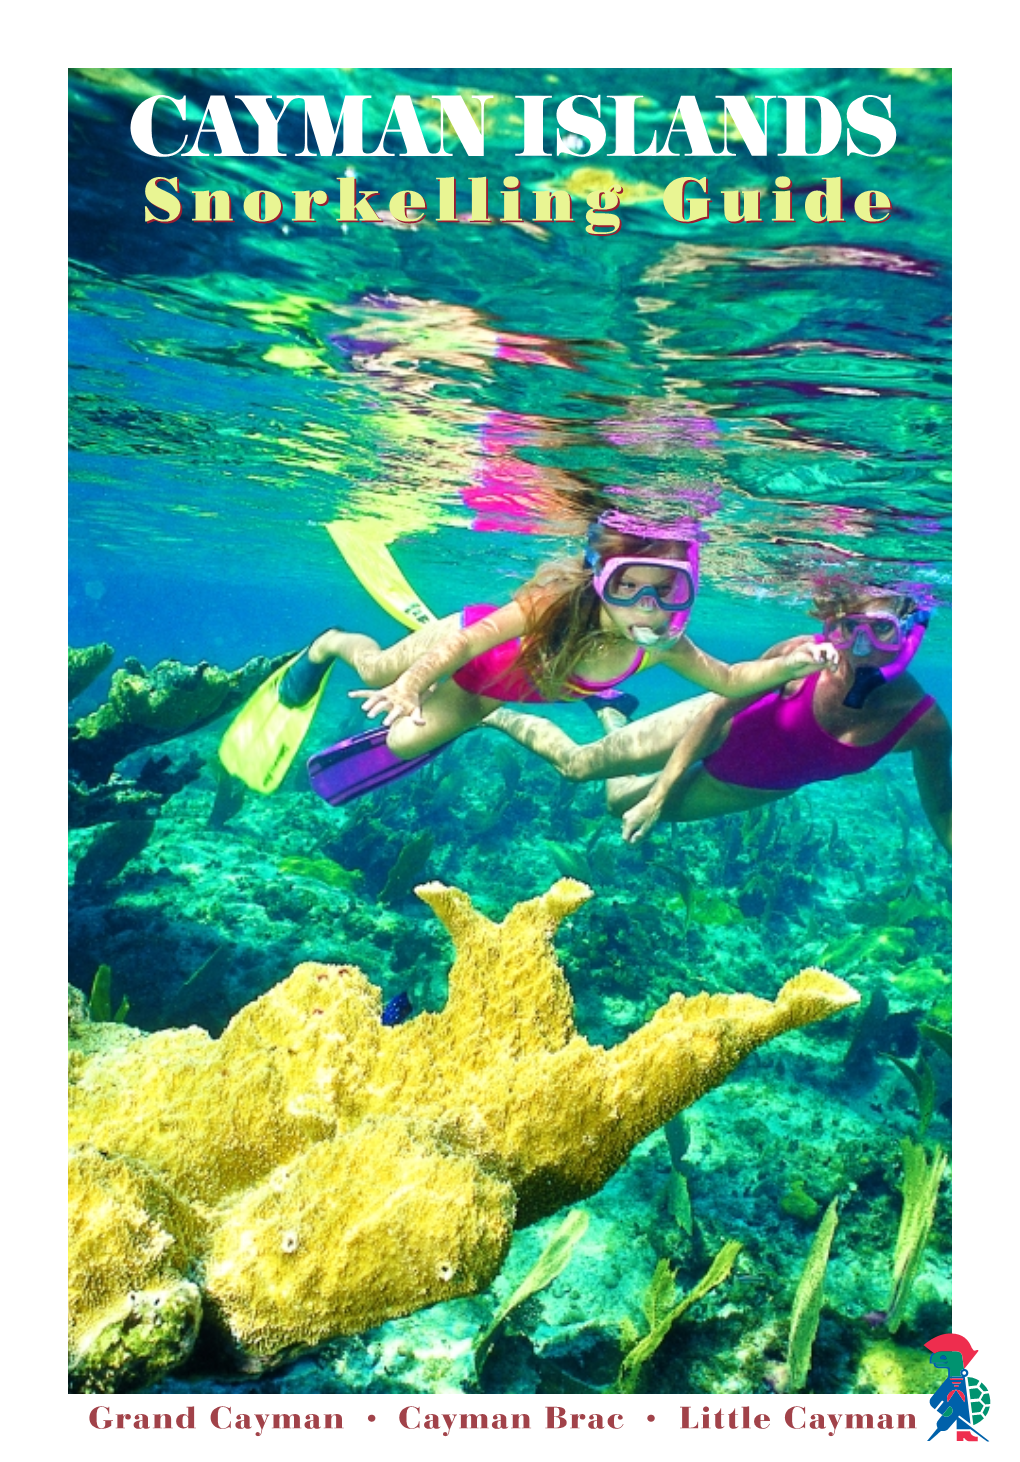 Snorkelling Guide Grab a Mask, Fins and Snorkel! That’S All You’Ll Need to Experience the Magnificent Underwater Universe Sur- Rounding the Cayman Islands